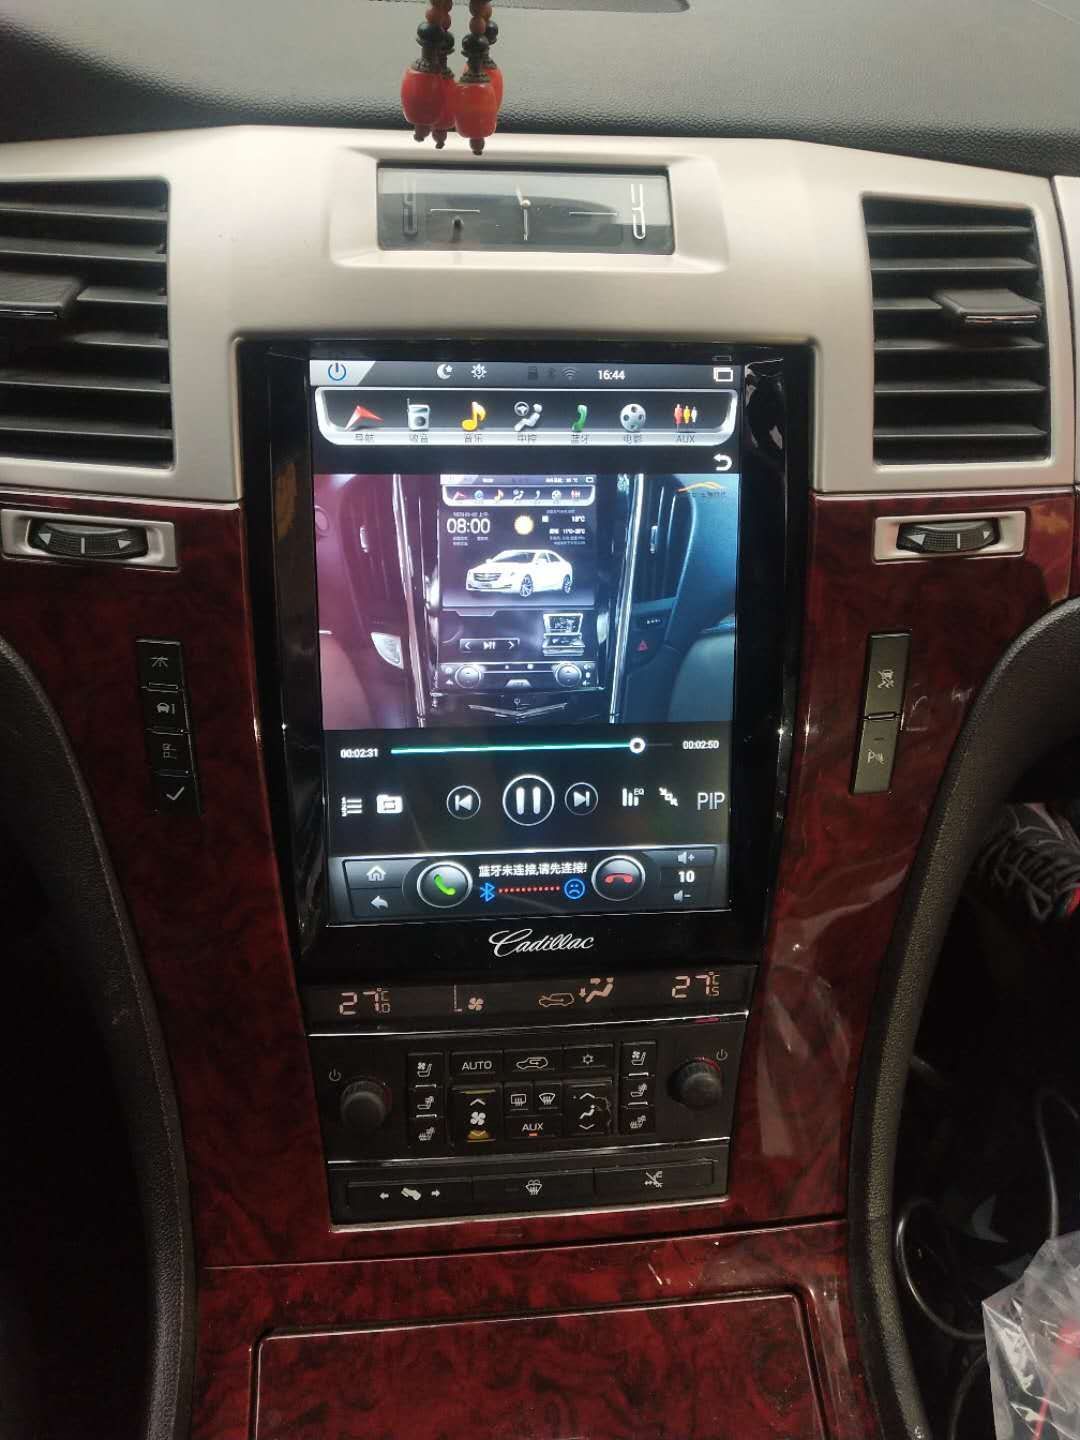 [Open-box] [PX6 SIX-CORE] 10.4" ANDROID 8.1 Fast Boot VERTICAL SCREEN Navigation Radio for Cadillac Escalade 2007 - 2014-Phoenix Automotive